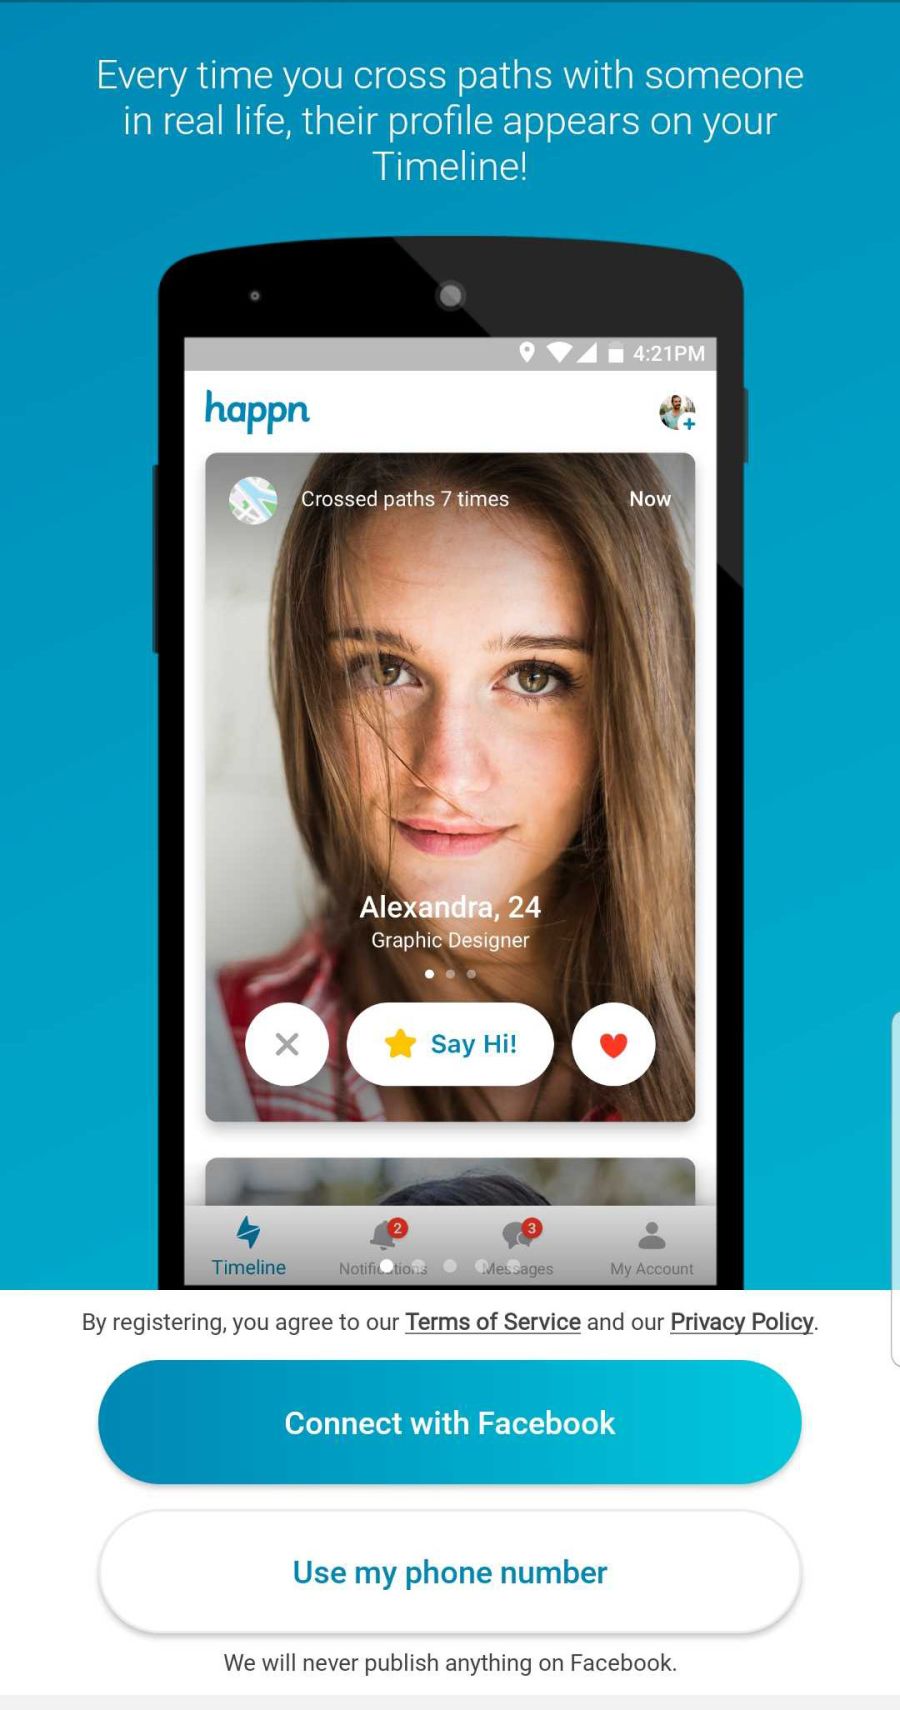 Best dating apps for 2020